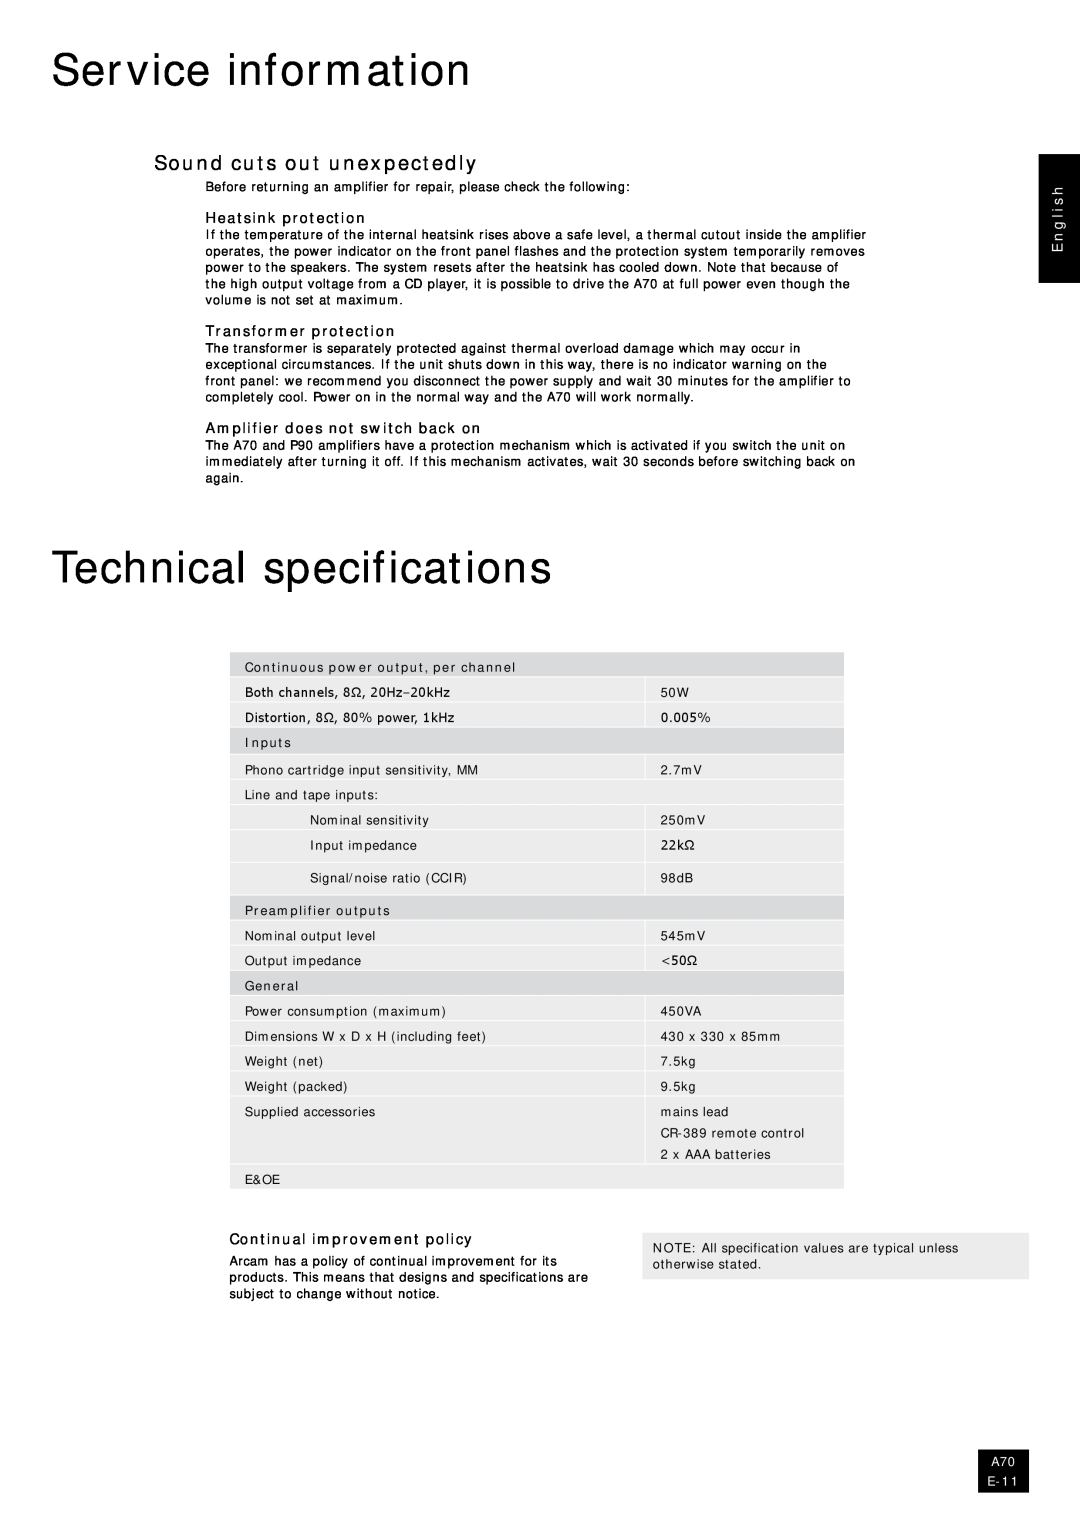 Arcam A70 Service information, Technical specifications, Sound cuts out unexpectedly, Heatsink protection, Inputs, General 